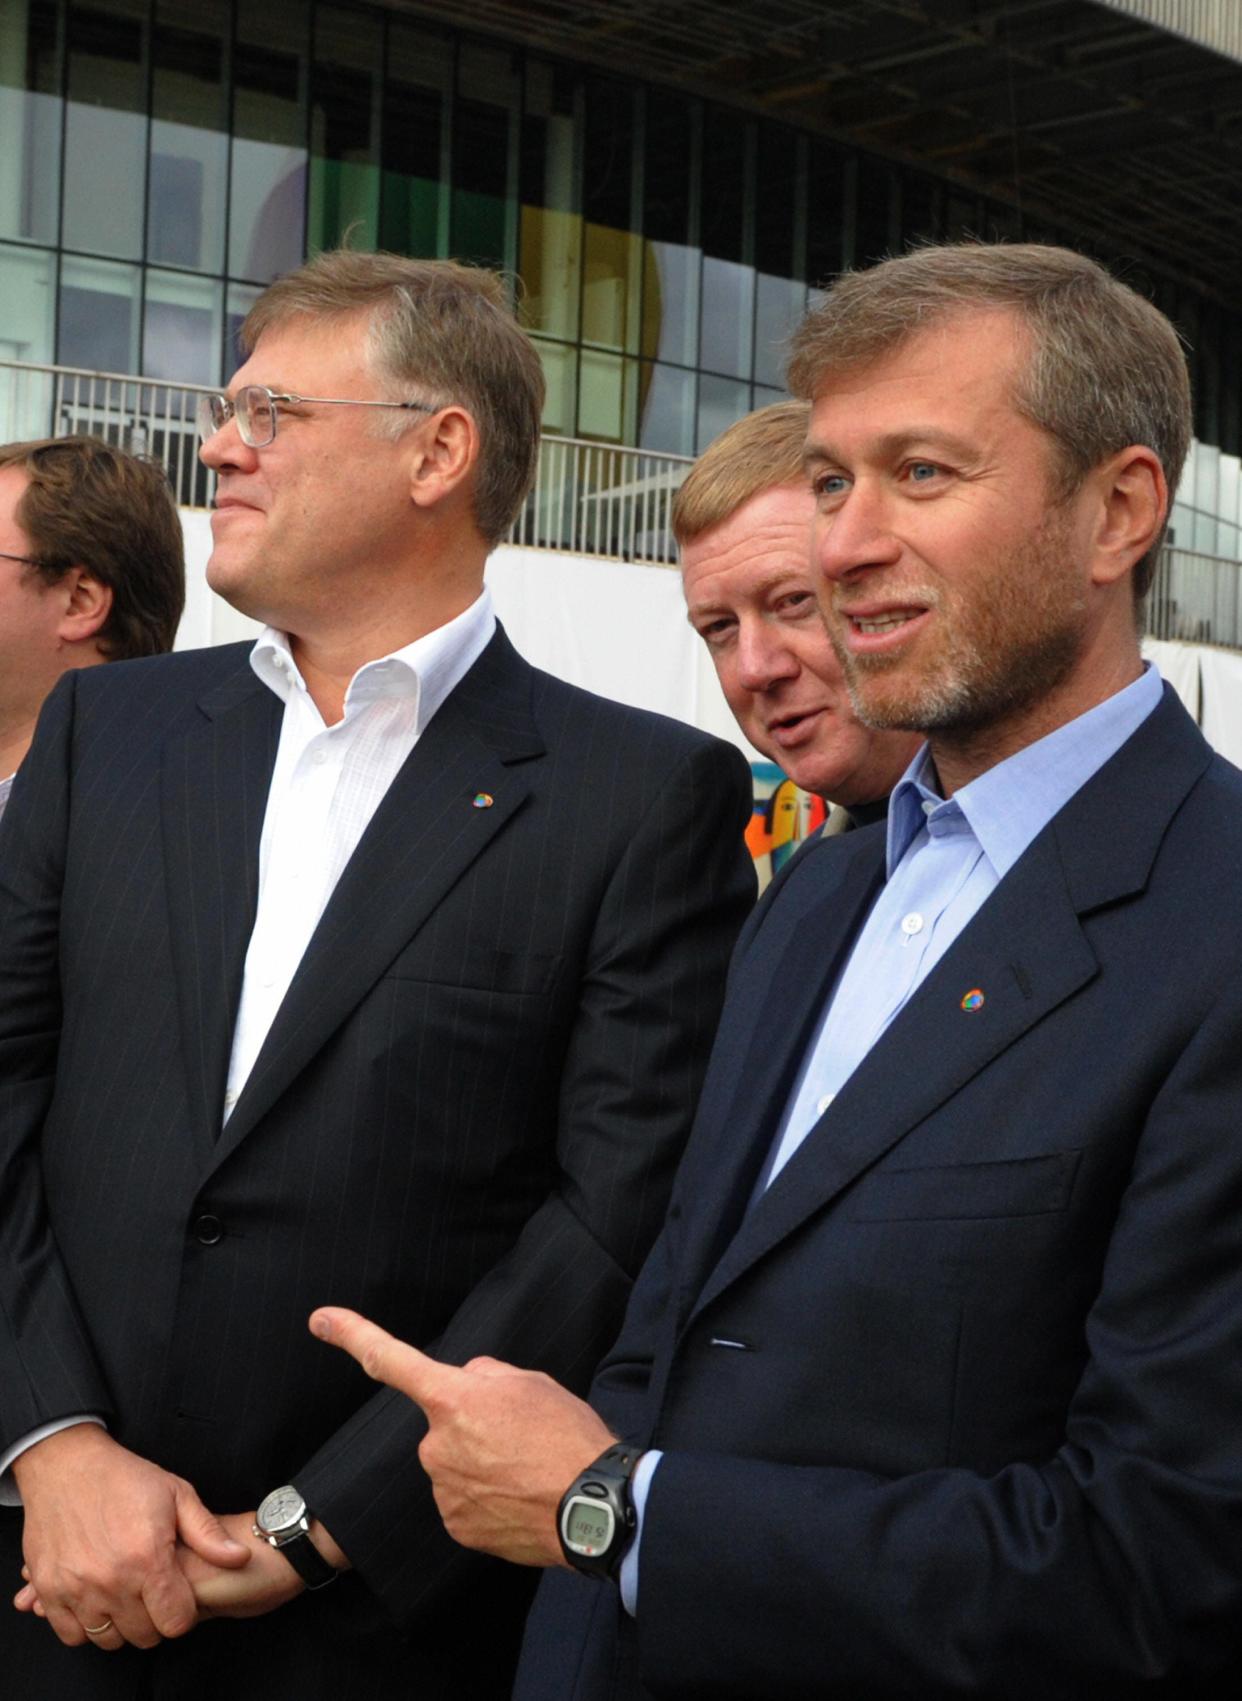 Chairman of "Evraz Group" Alexander Abramov (L) and Russian billionaire Roman Abramovich (R) take part in celebrations marking the third anniversary of the Moscow School of Management "Skolkovo" outside Moscow, on September 20, 2009.